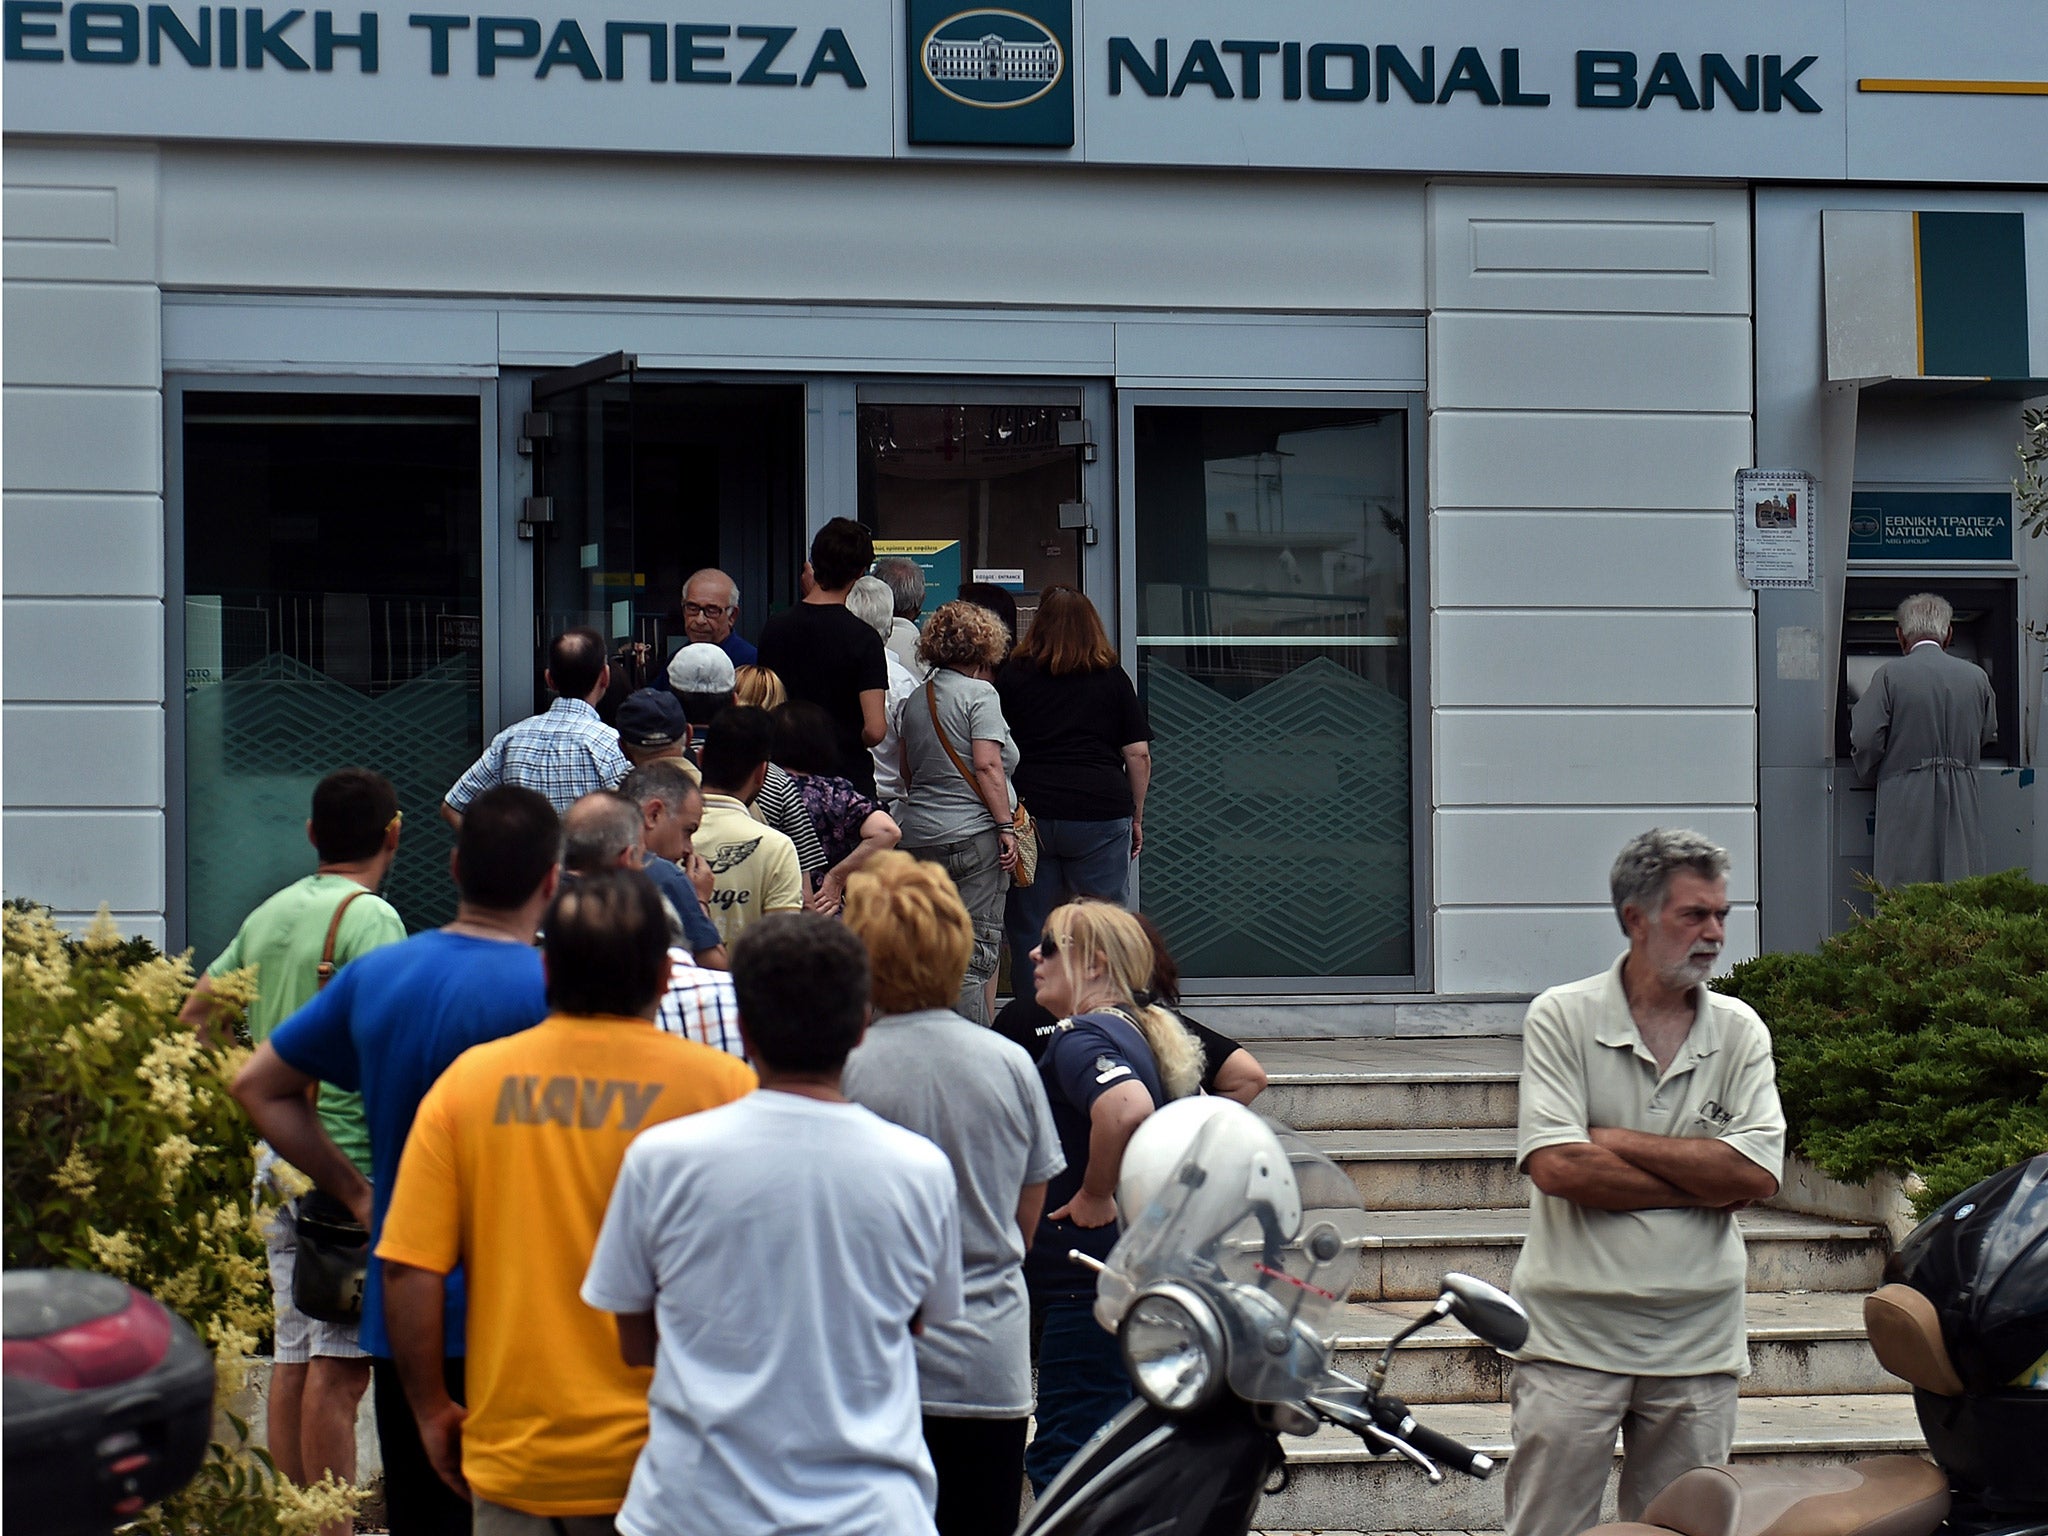 Greeks have been withdrawing money from banks amid the country's often fraught negotiations with its creditors